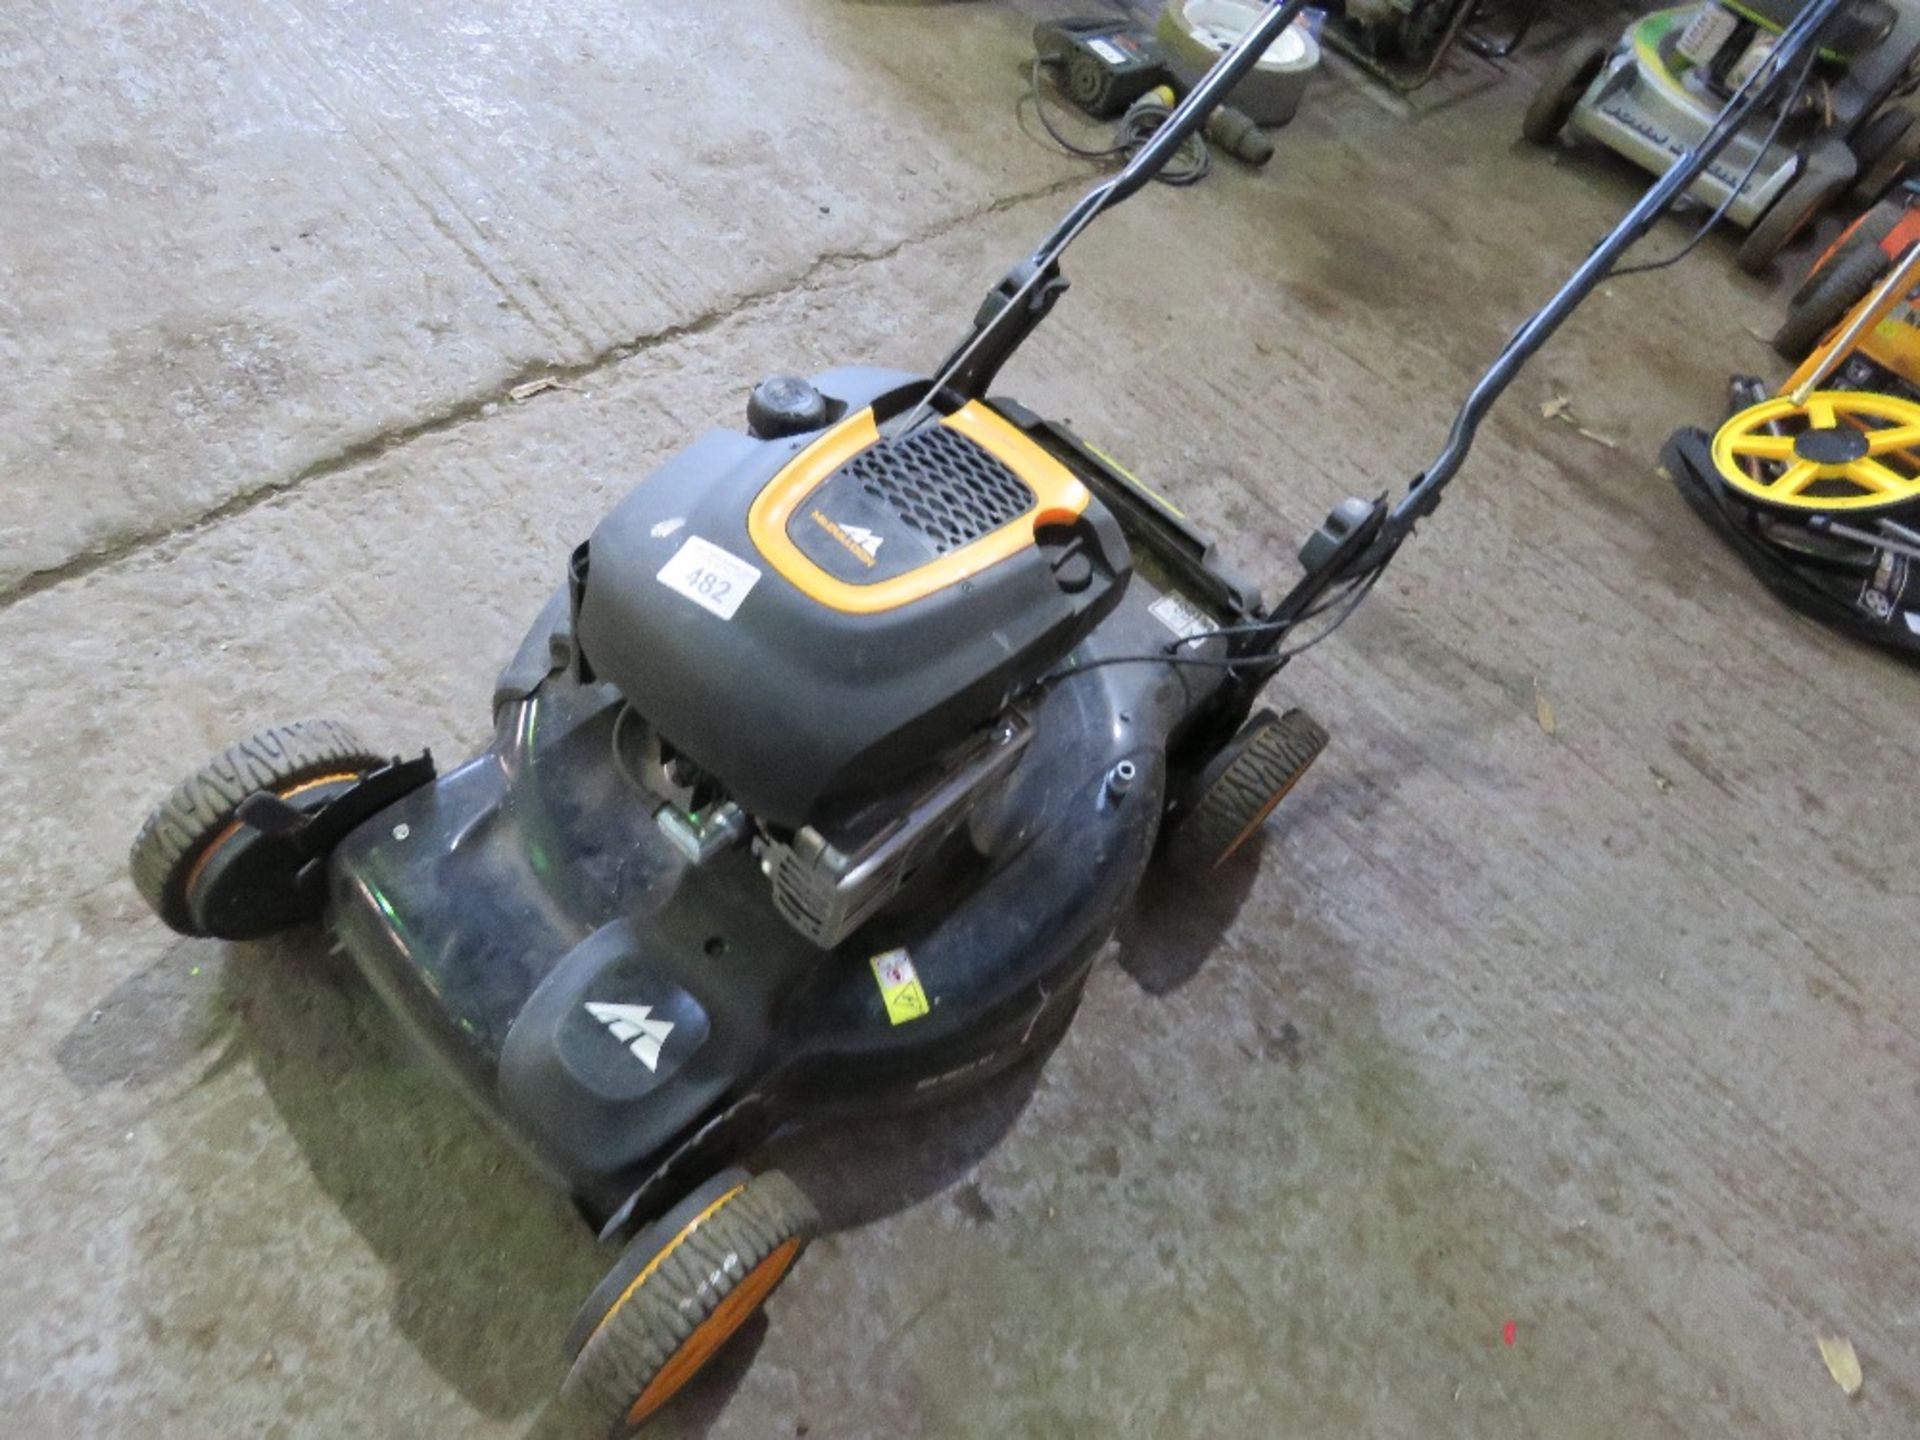 McCULLOCH PETROL LAWNMOWER. - Image 2 of 2